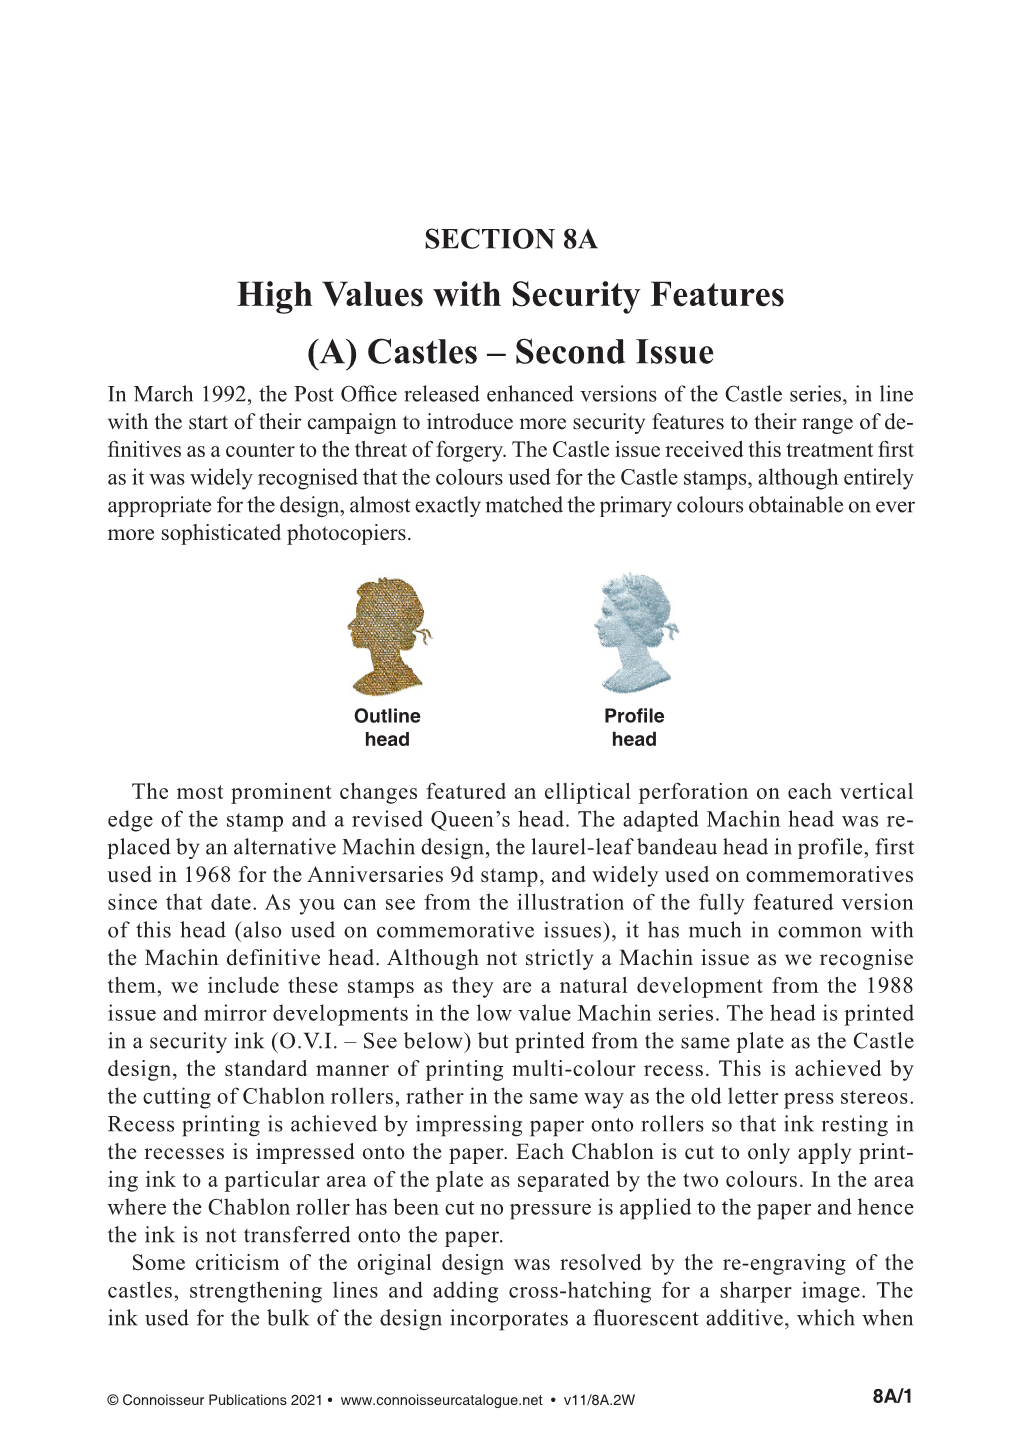 High Values with Security Features (A) Castles – Second Issue